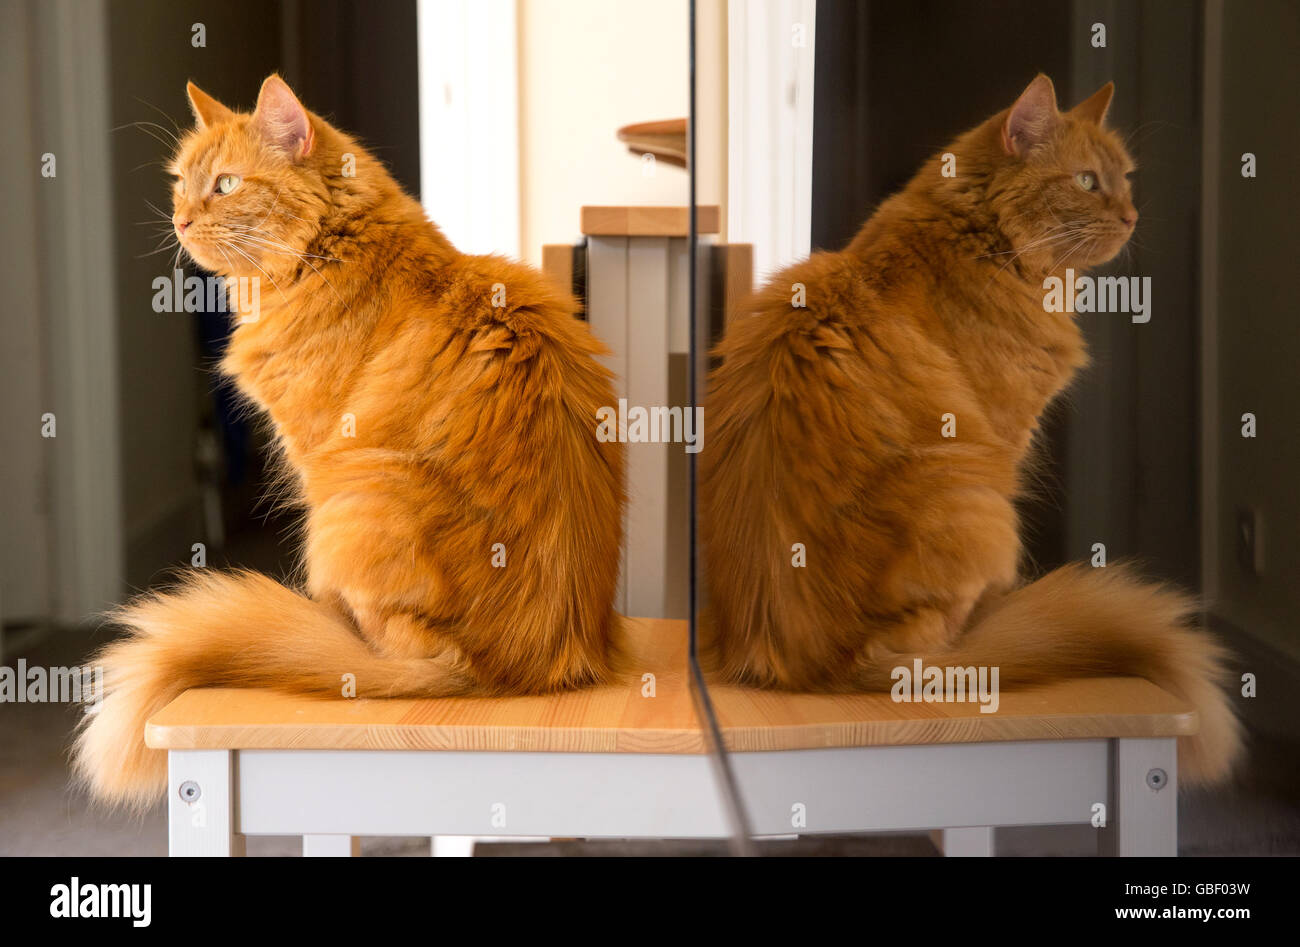 A ginger cat sitting on a table with its reflection in a flatscreen television Stock Photo